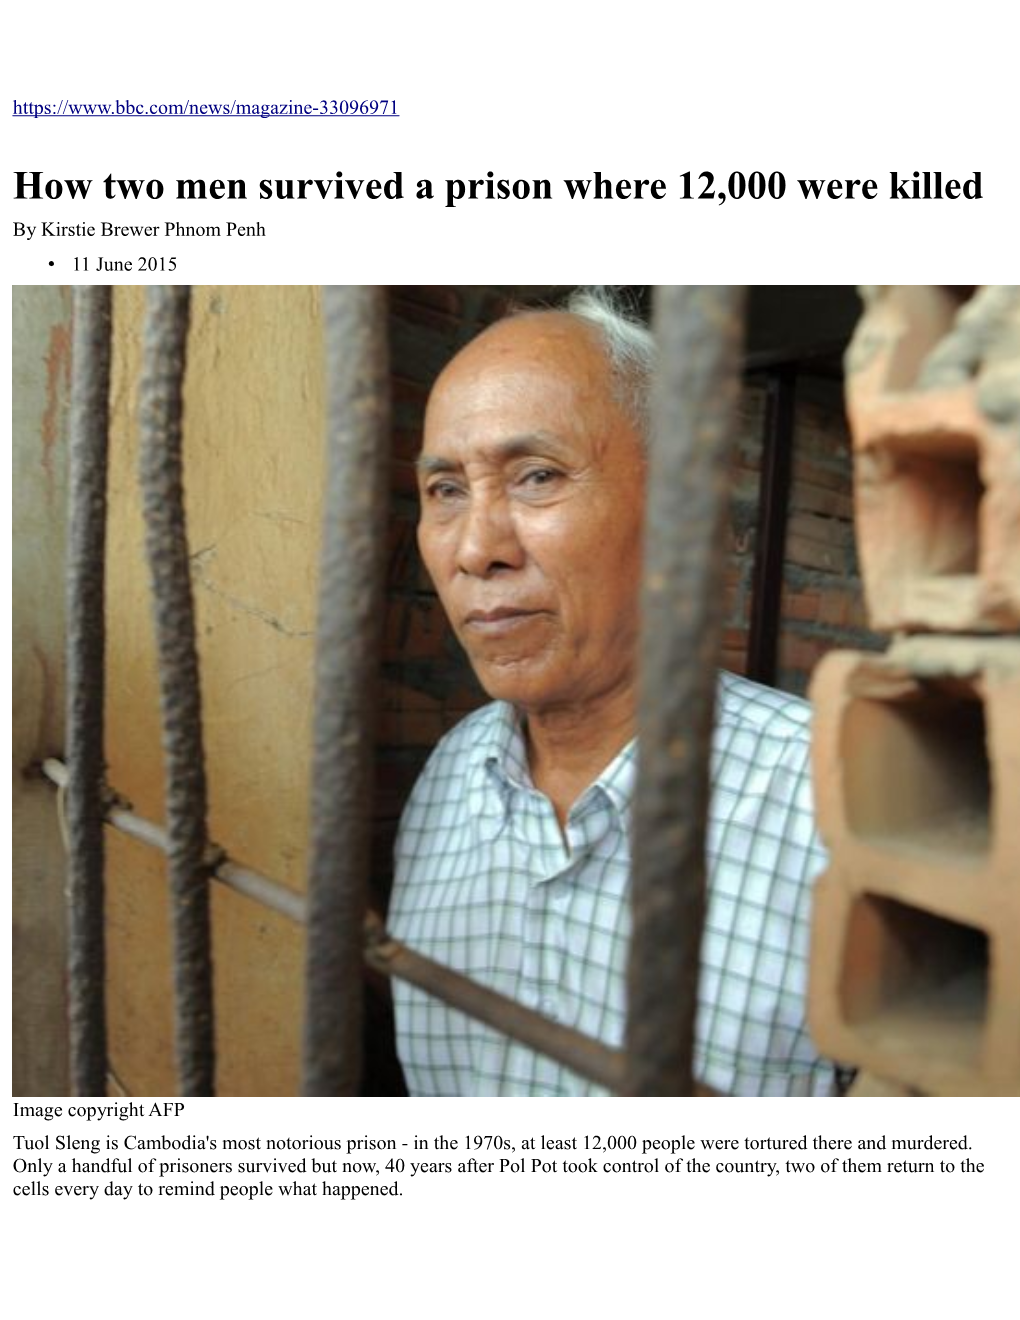 How Two Men Survived a Prison Where 12,000 Were Killed by Kirstie Brewer Phnom Penh • 11 June 2015